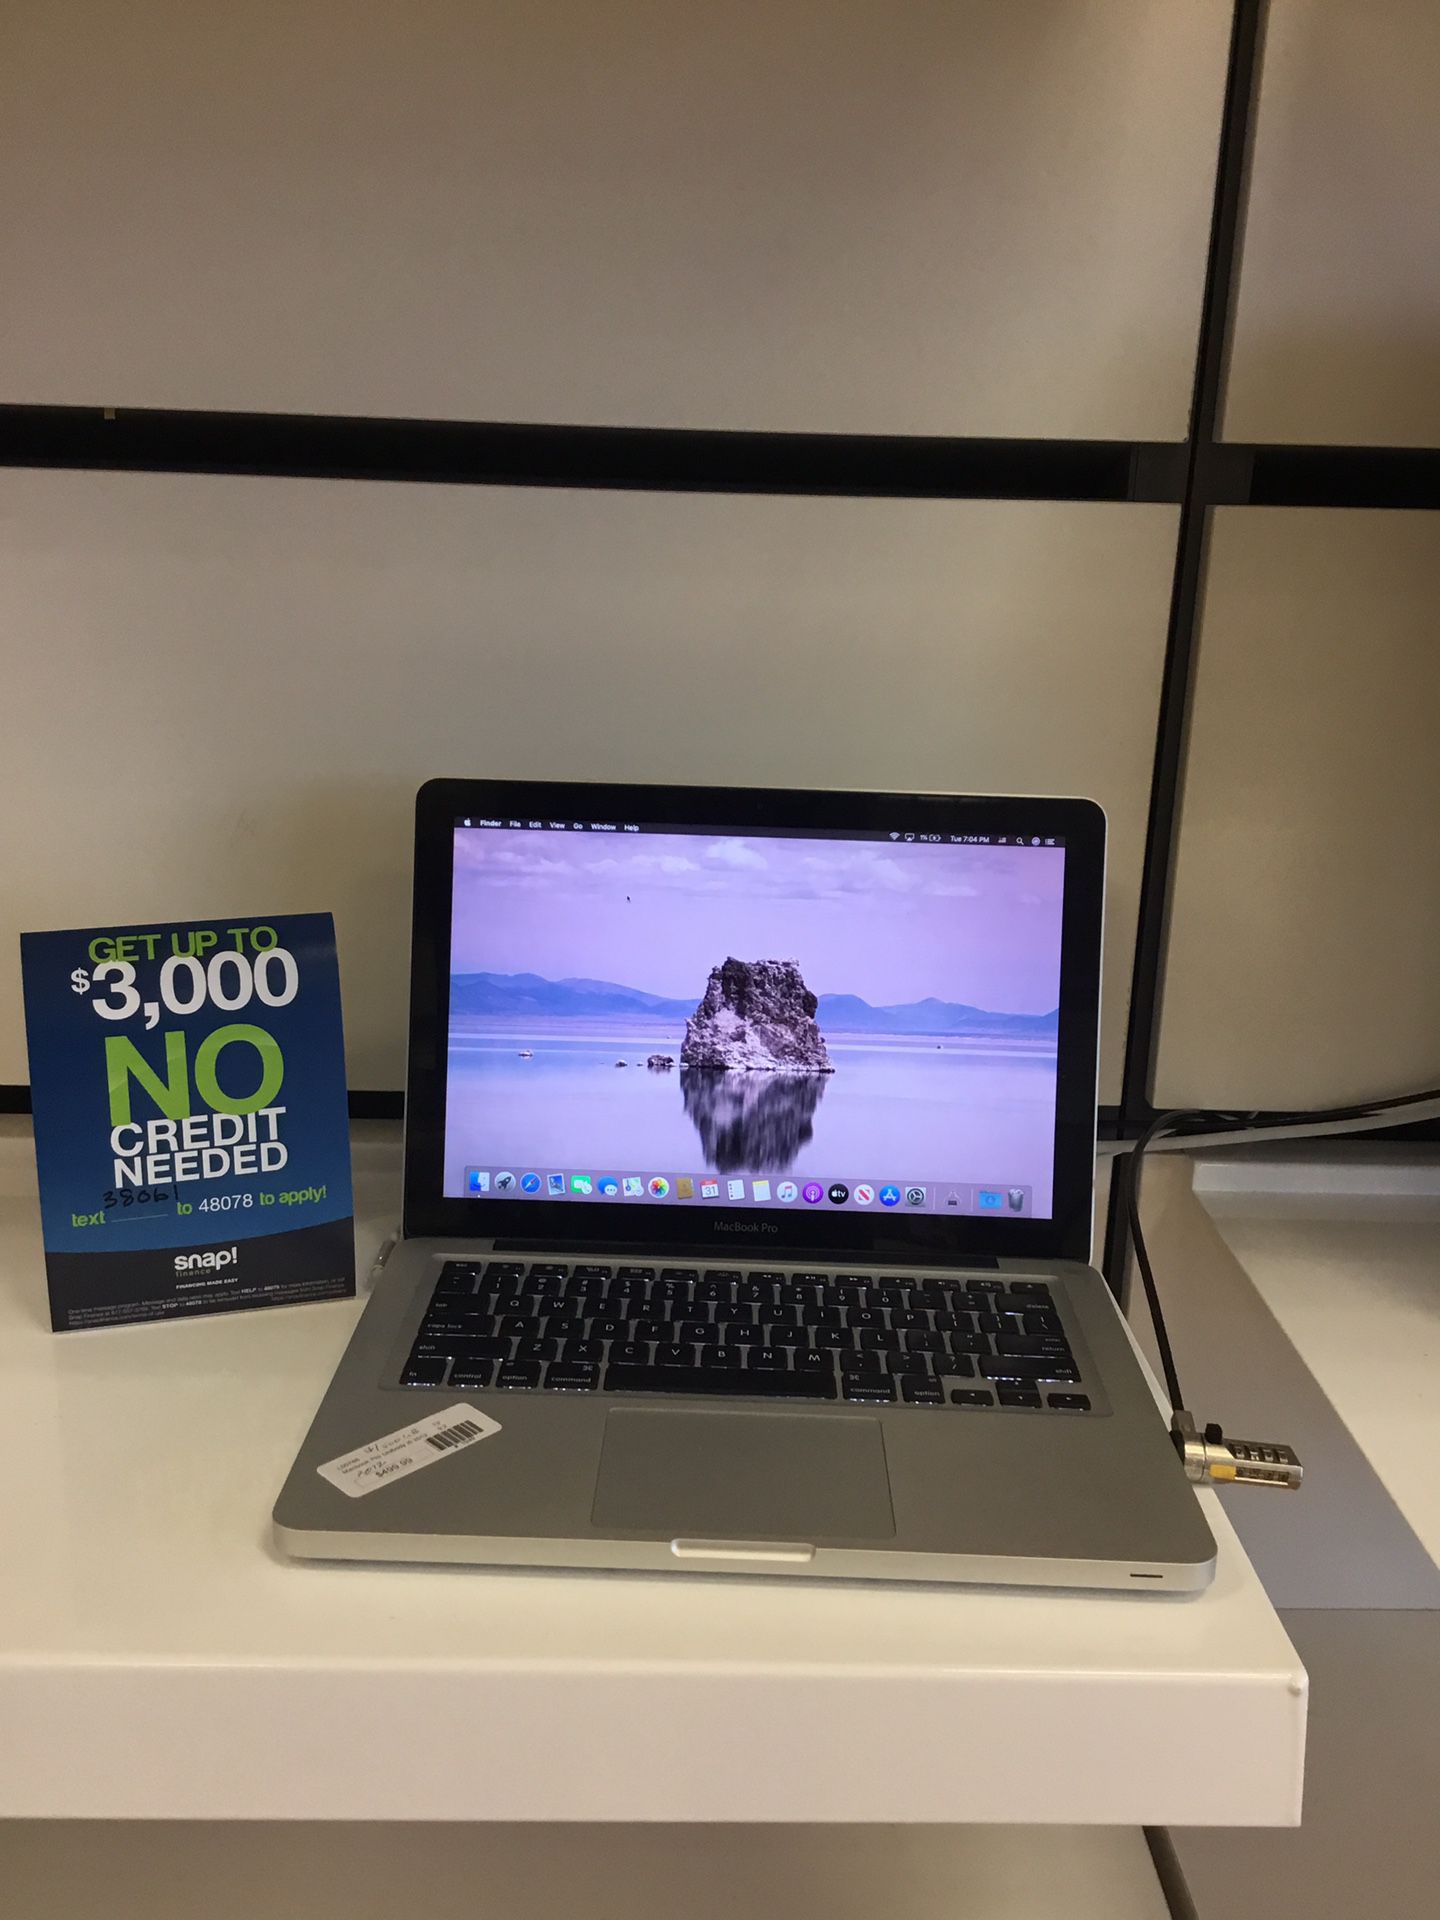 13” MacBook Pro i5 & 121gb SSD in excellent condition